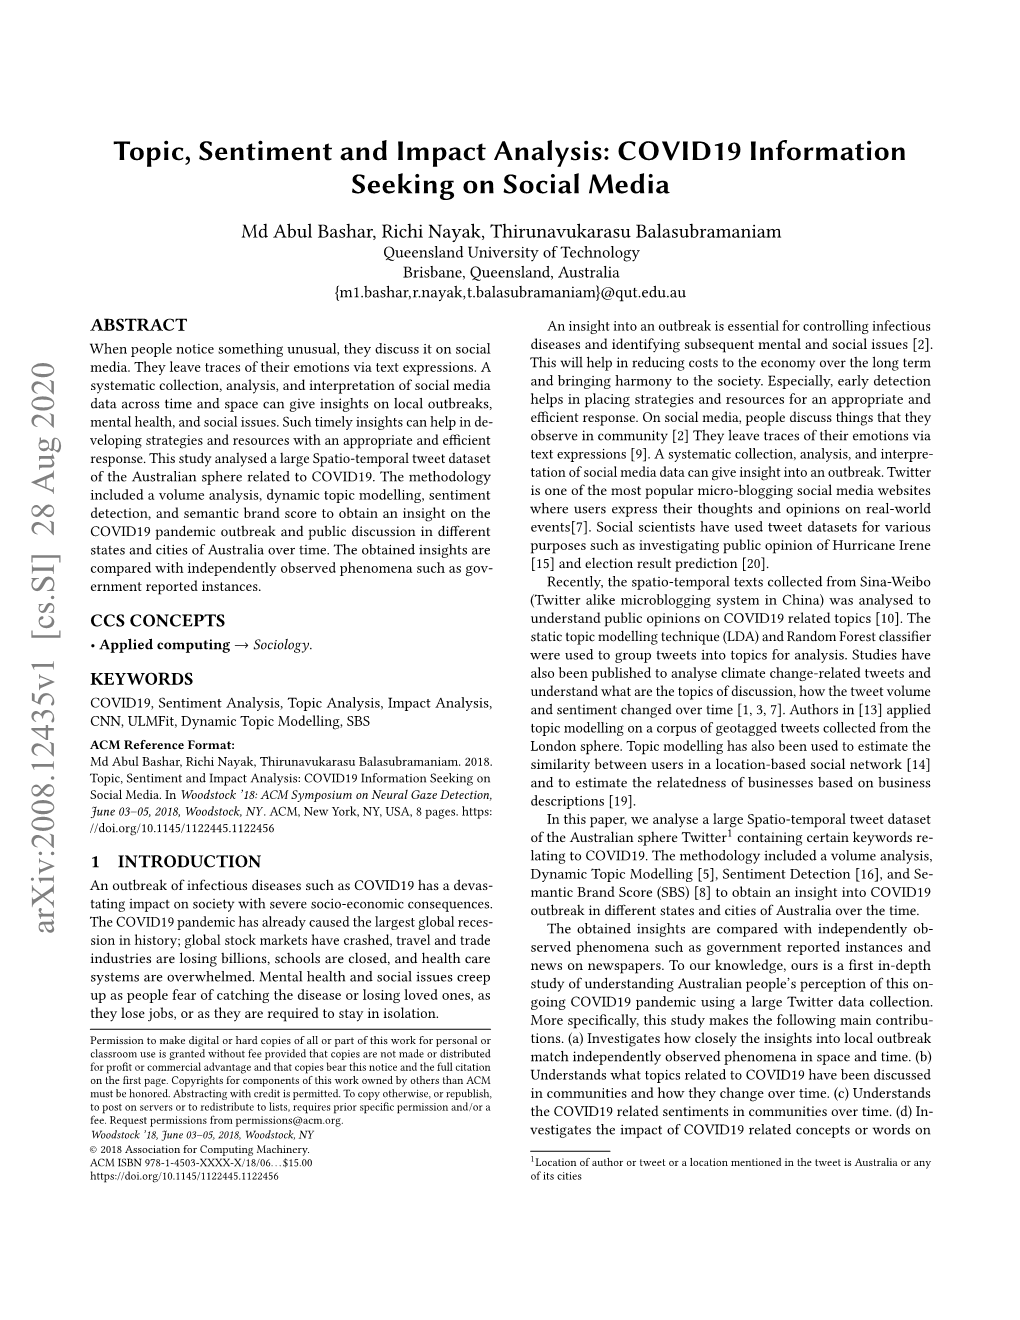 Topic, Sentiment and Impact Analysis: COVID19 Information Seeking on Social Media